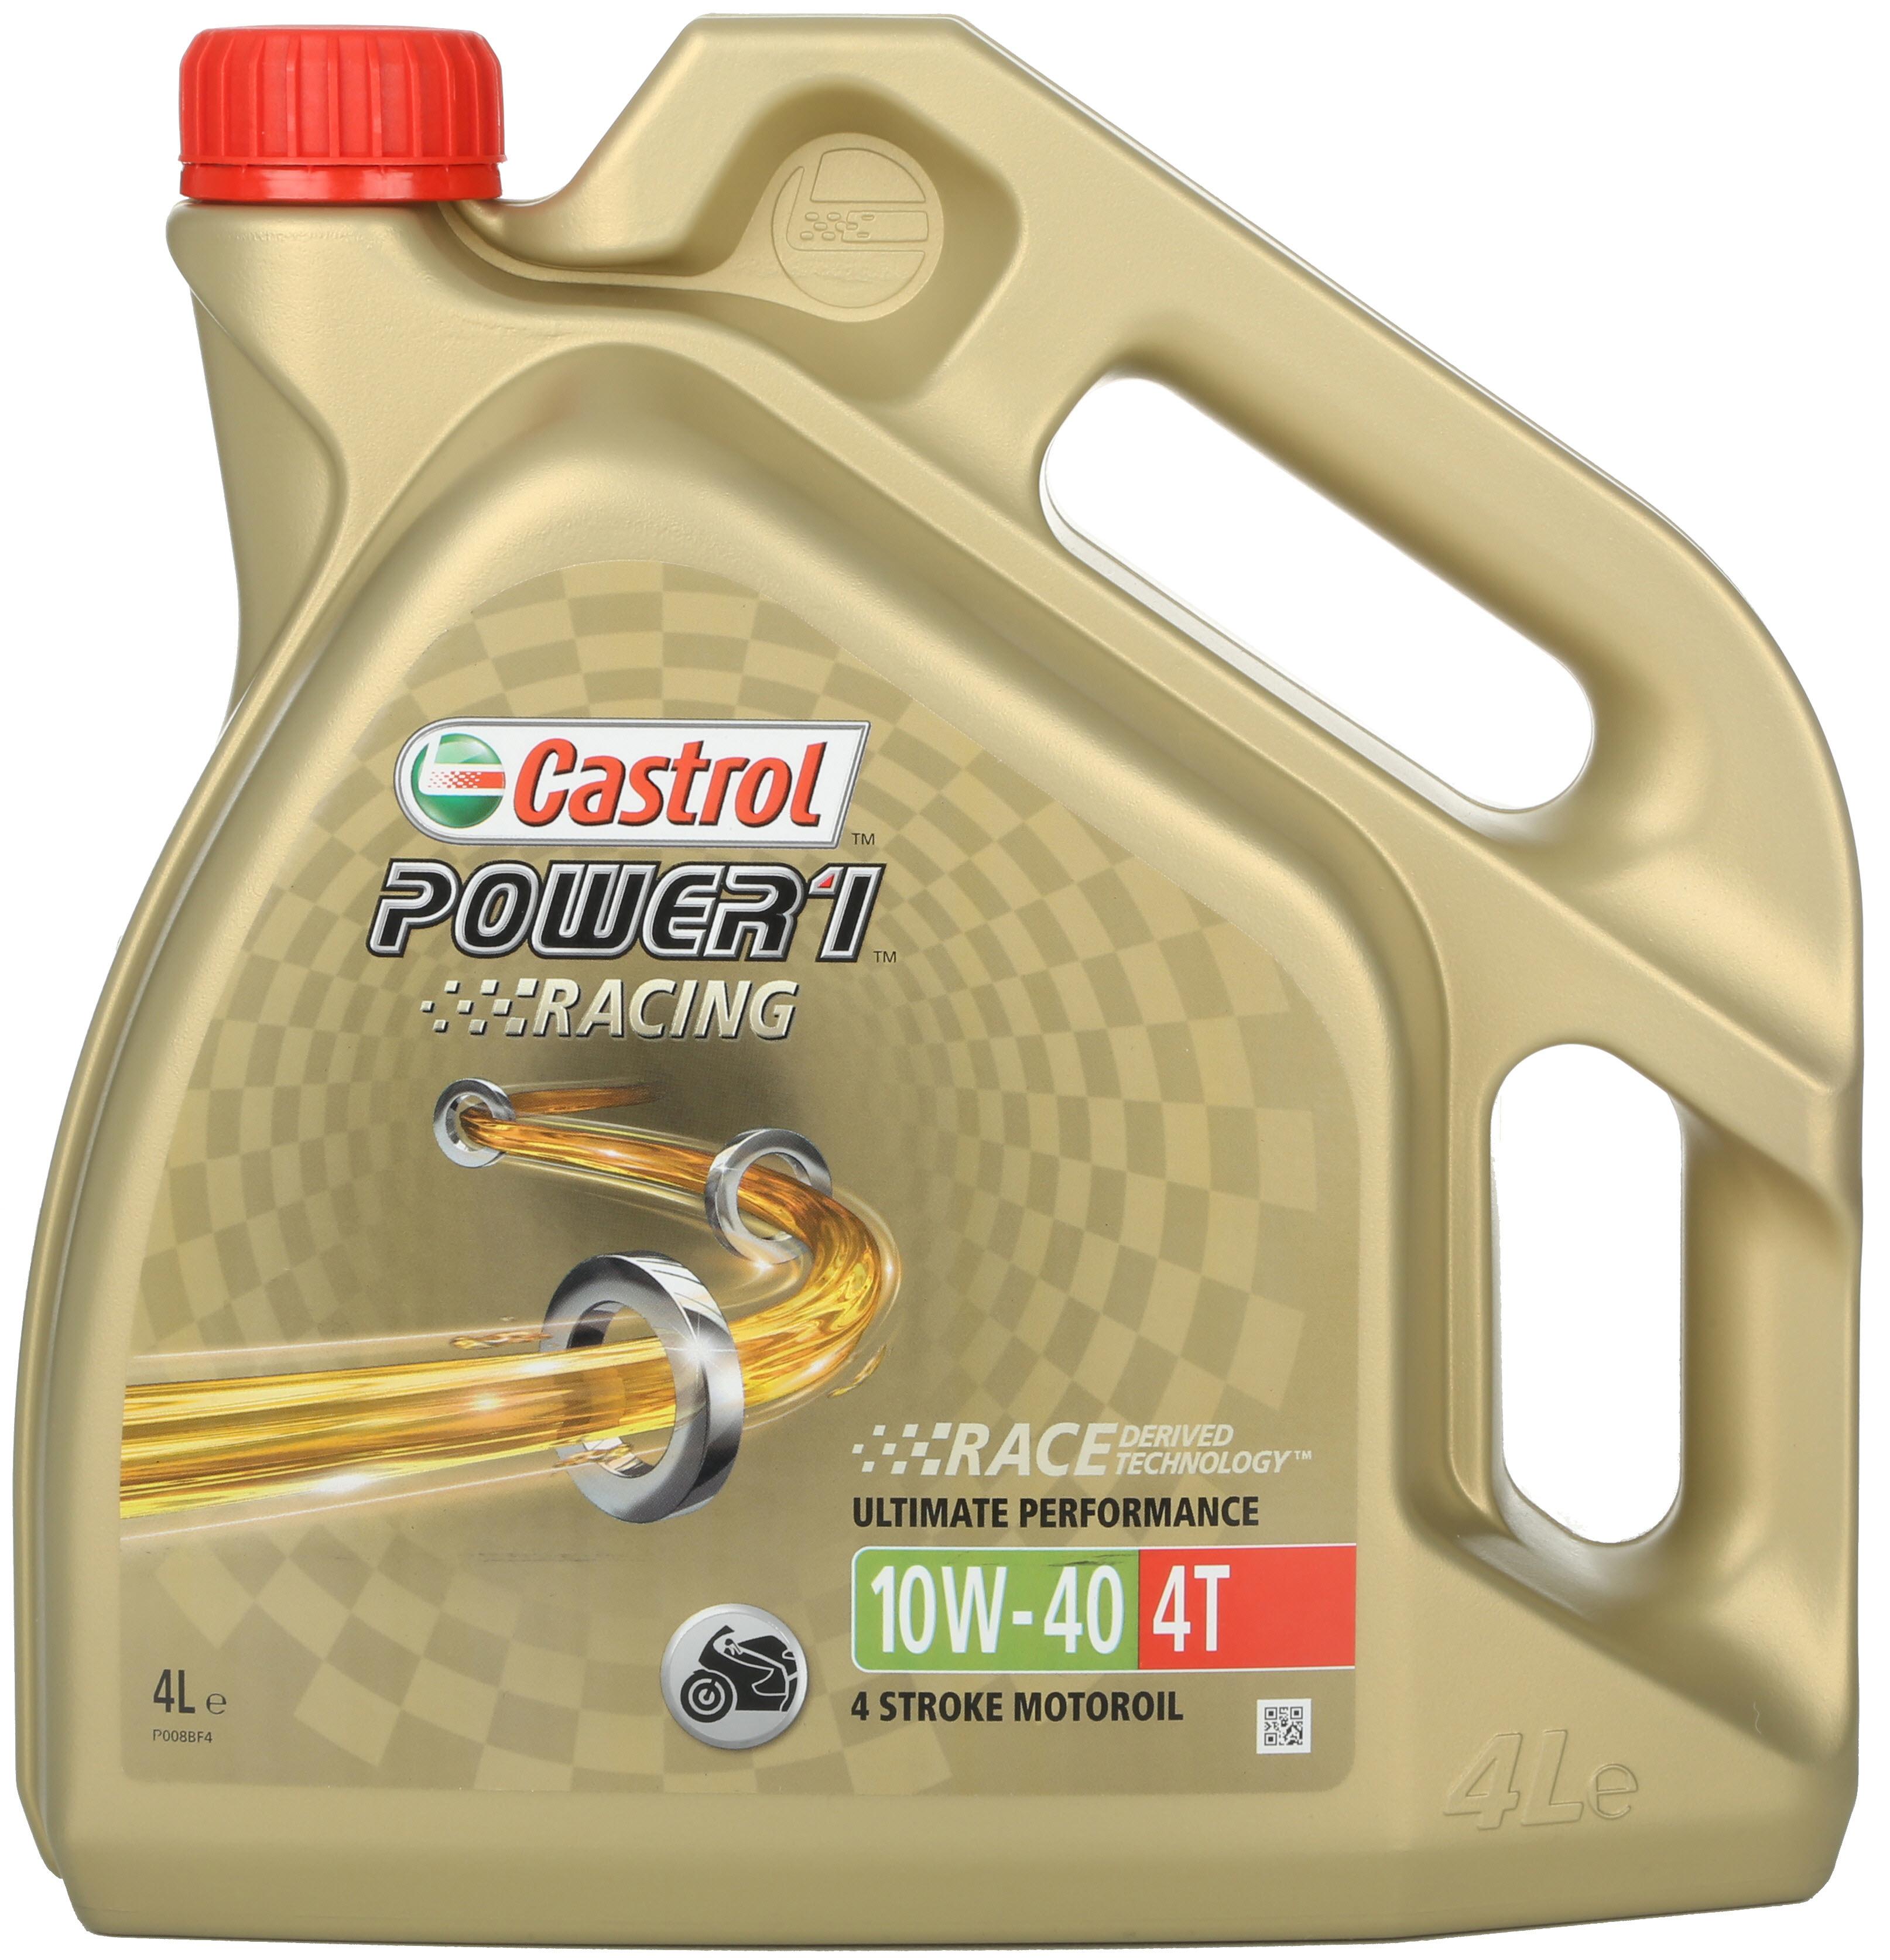 Castrol Power 1 Racing 4T 10W/40 Motorcycle Engine Oil - 4Ltr